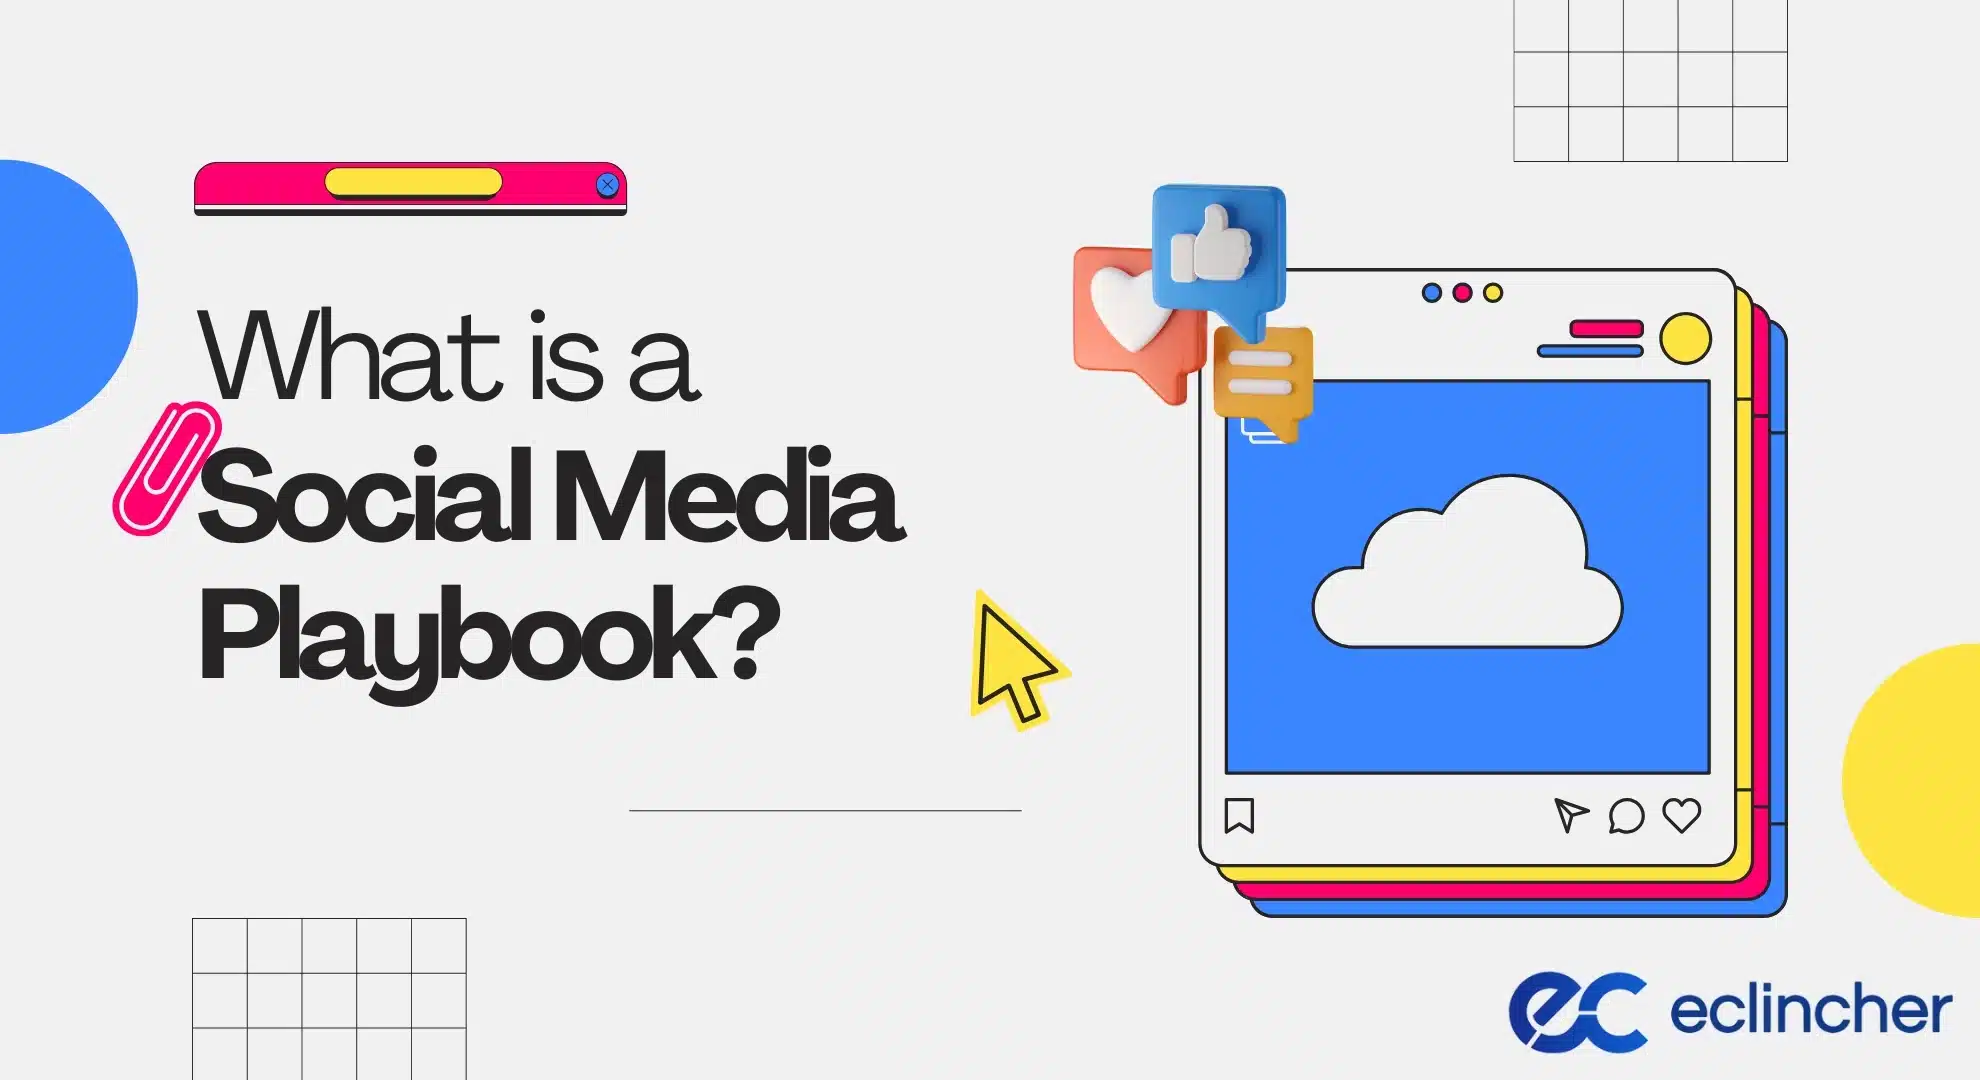 What is a social media playbook